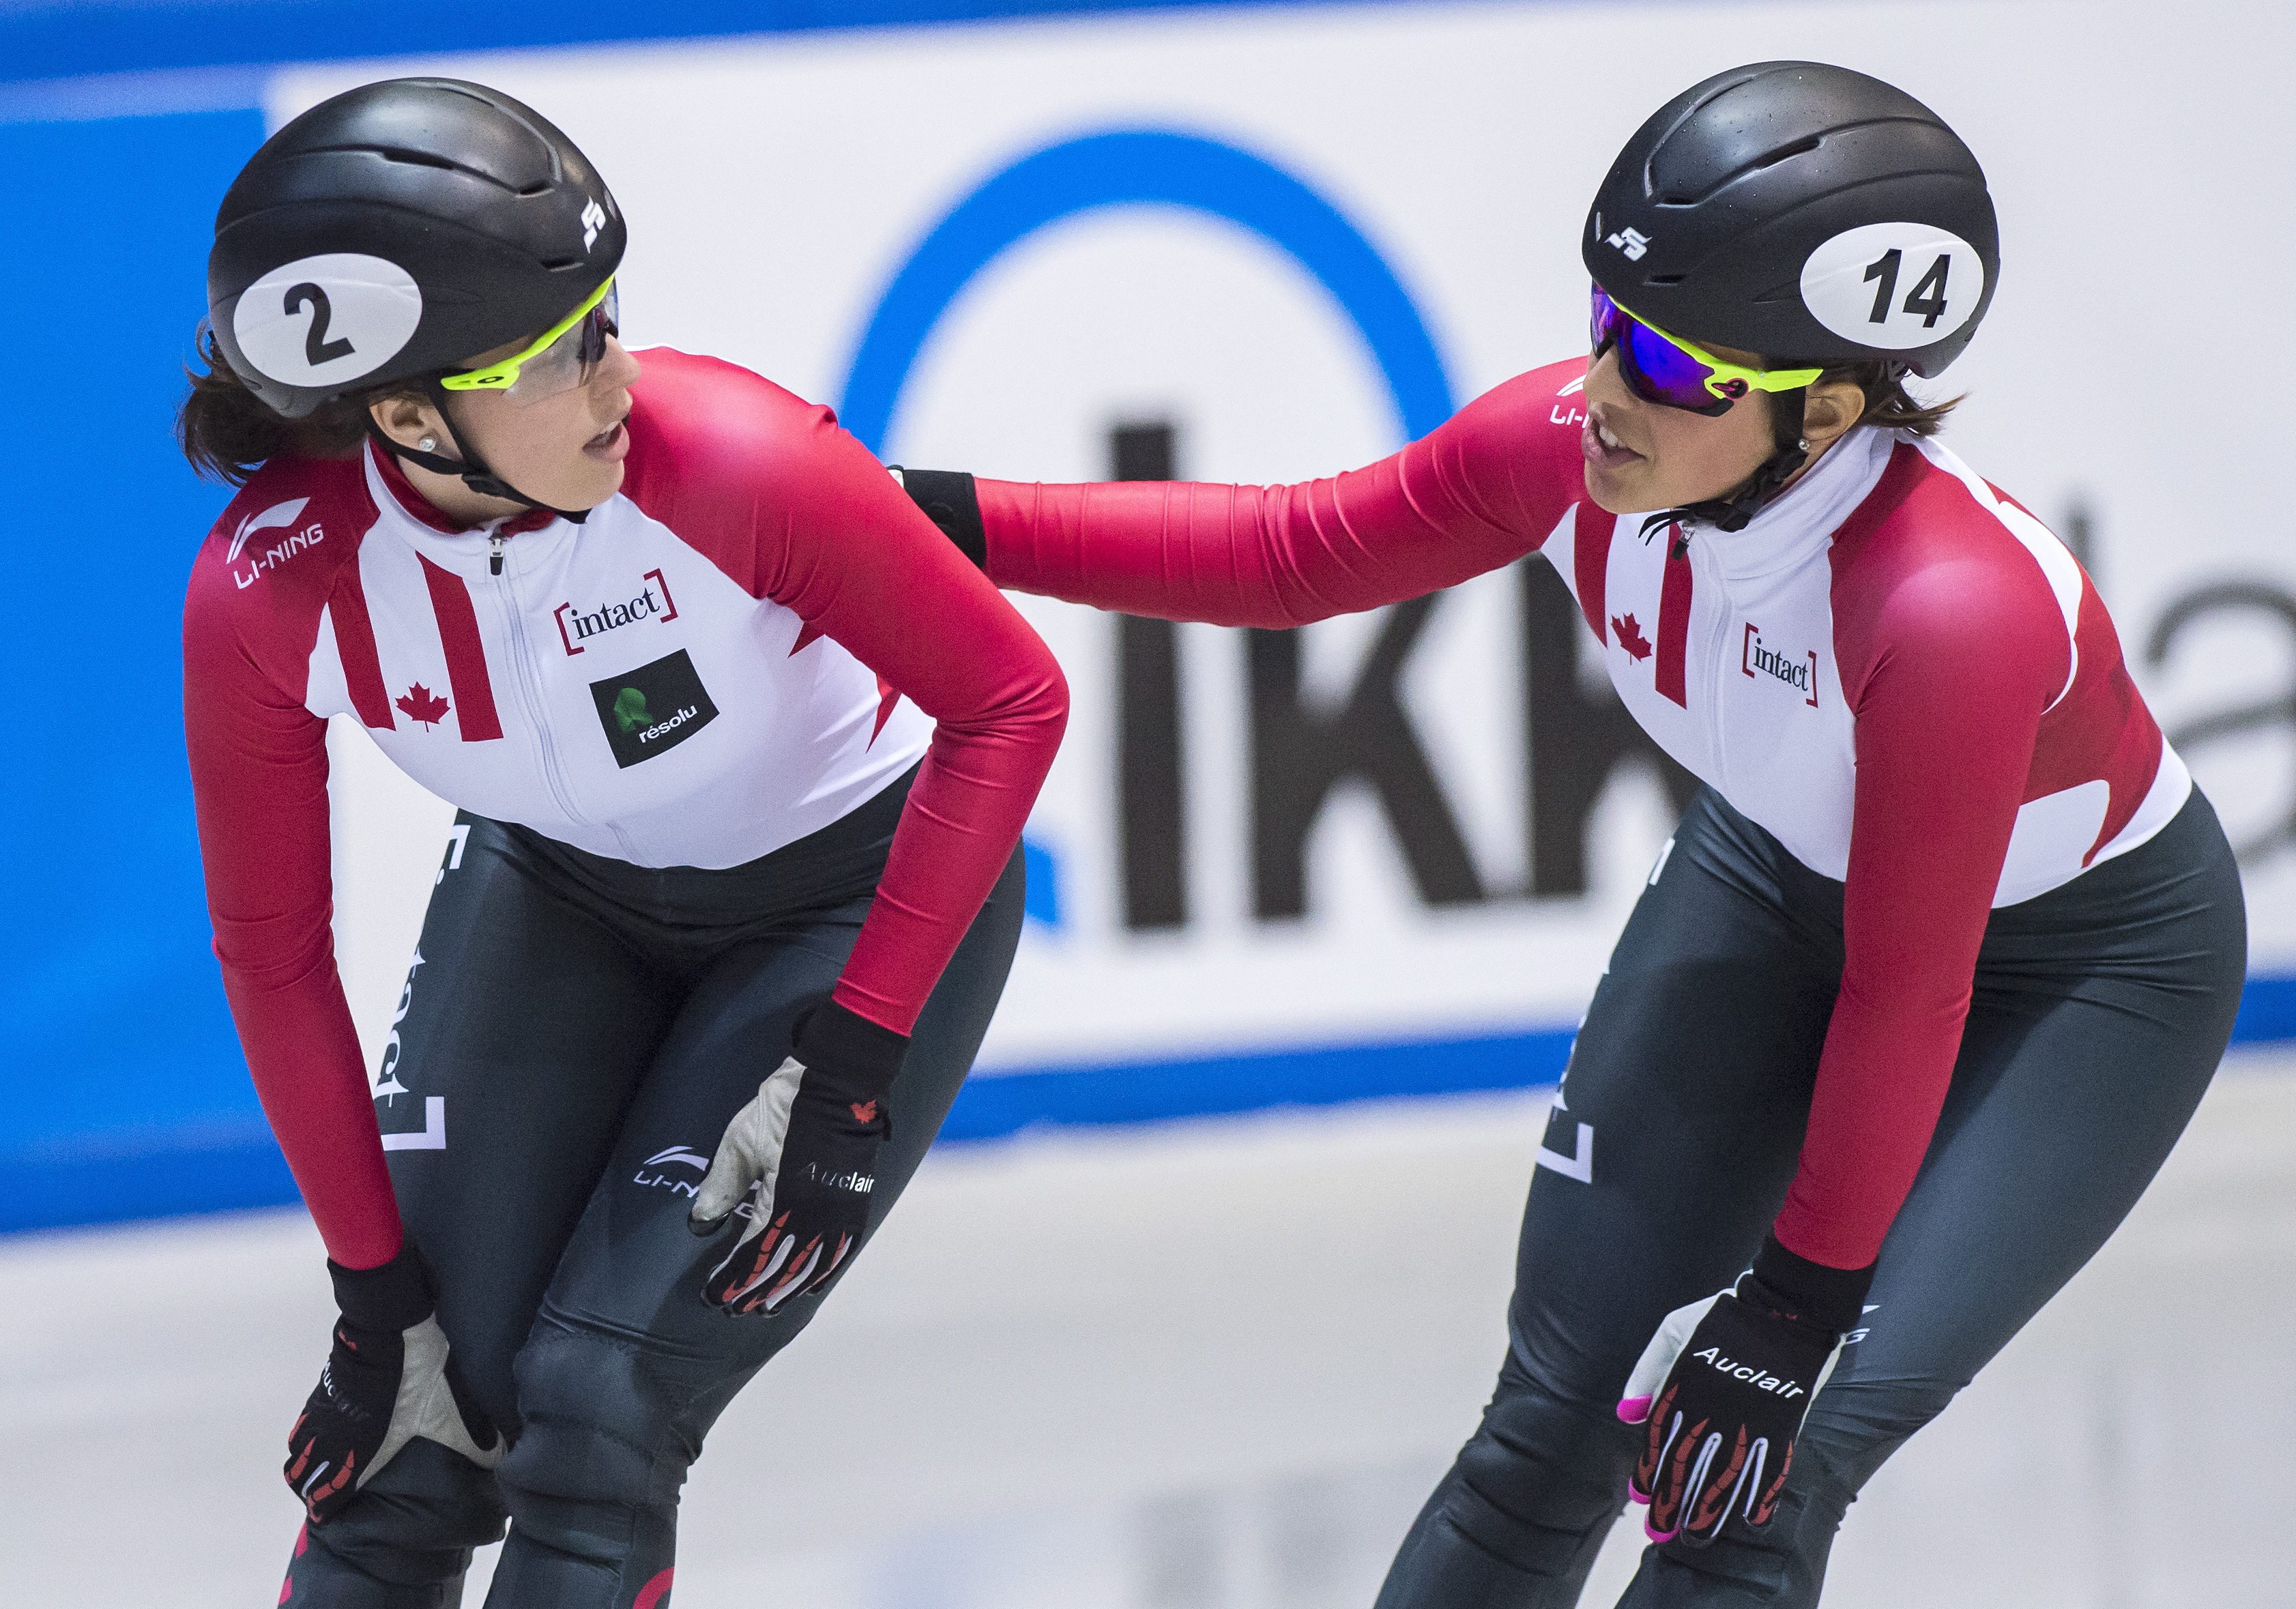 Third placed Valerie Maltais of Canada, right, congratulates winner Marianne St-Gelais of Canada, left, during the women 1000m at the short track speed skating World Cup in Dresden, Germany, Saturday, Feb. 4, 2017. (AP Photo/Jens Meyer)